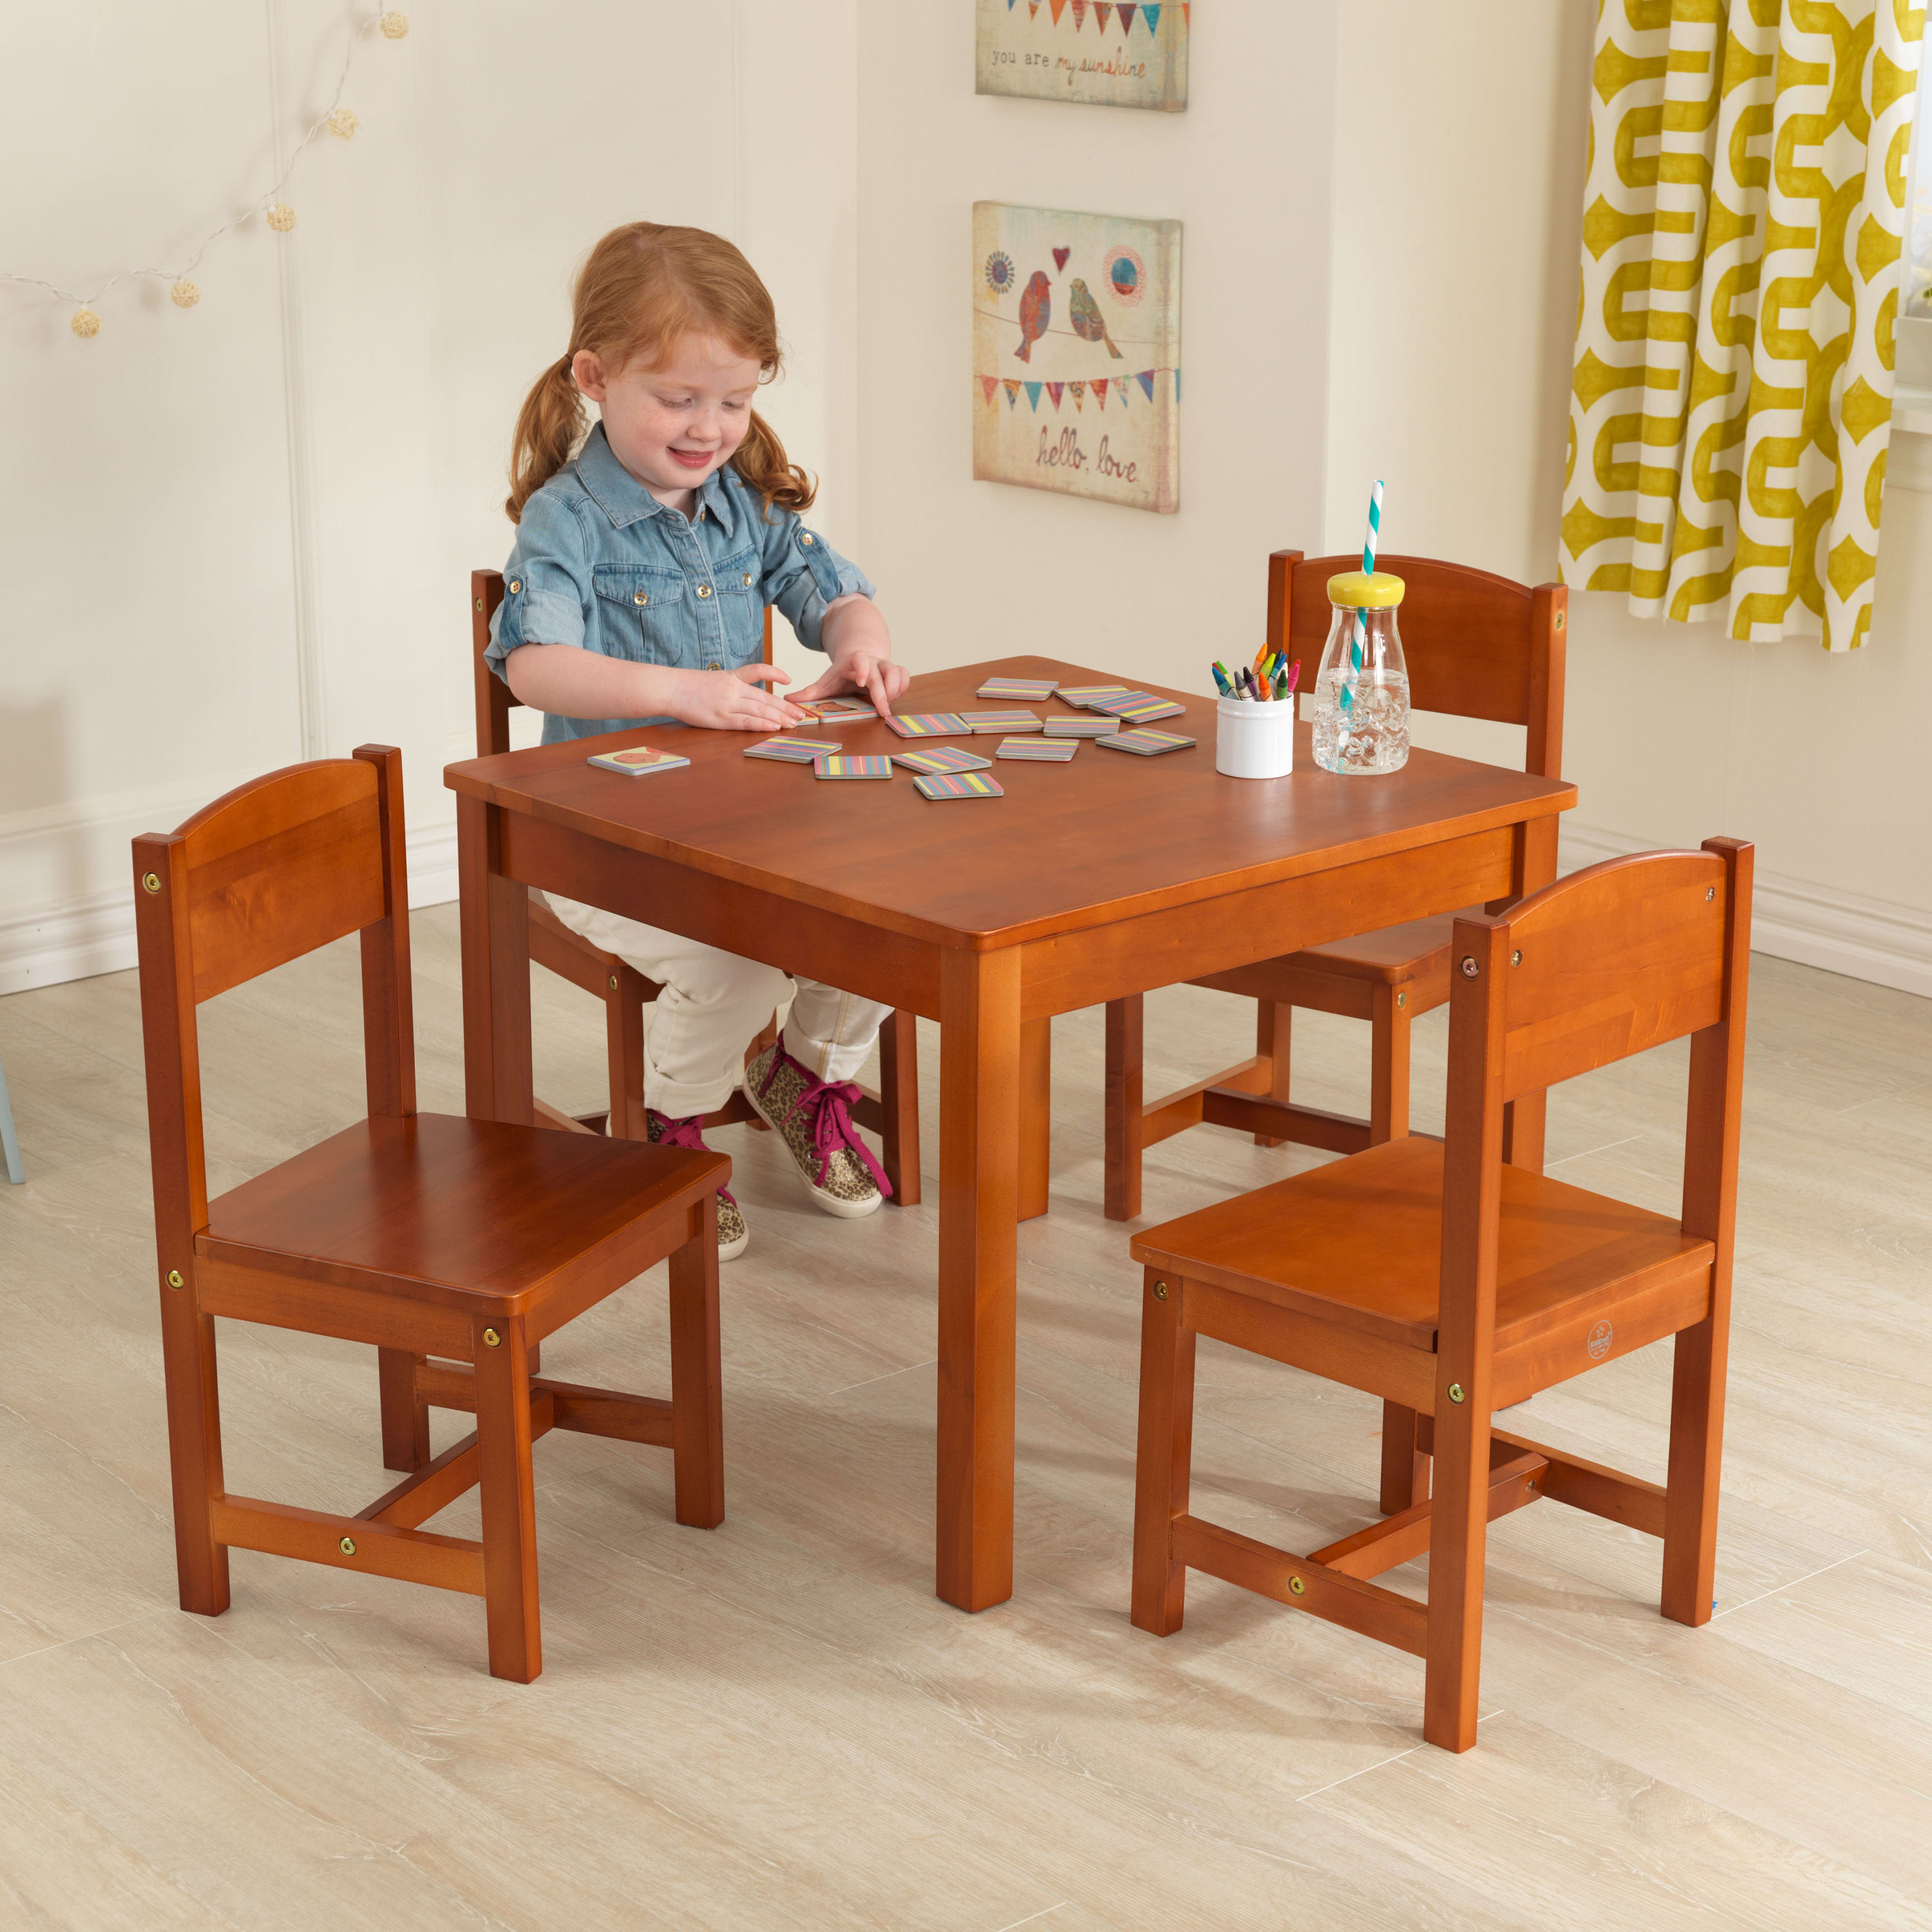 KidKraft KidKraft Wooden Farmhouse Table & 4 Chairs Set, Children's Furniture for Arts and Activity – Pecan - image 5 of 6